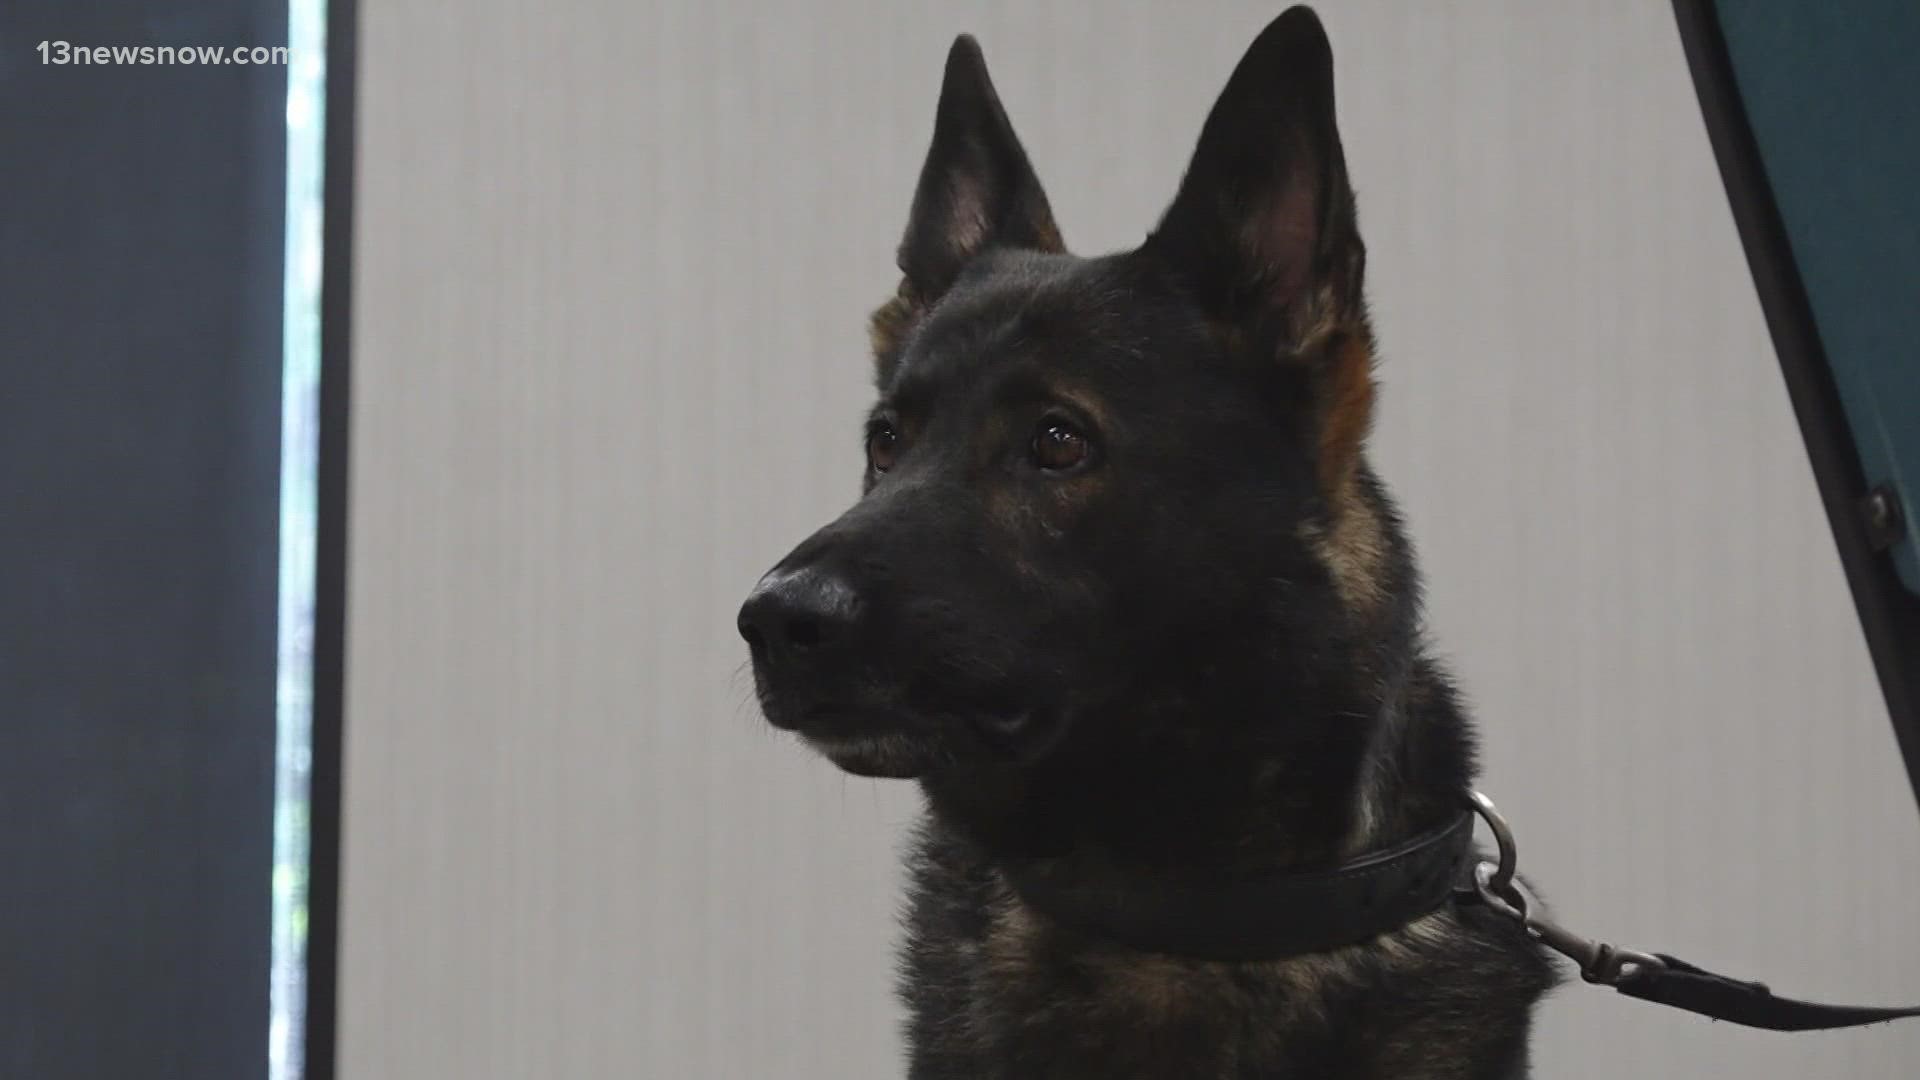 K9 dogs are being trained to detect COVID-19 positive samples.